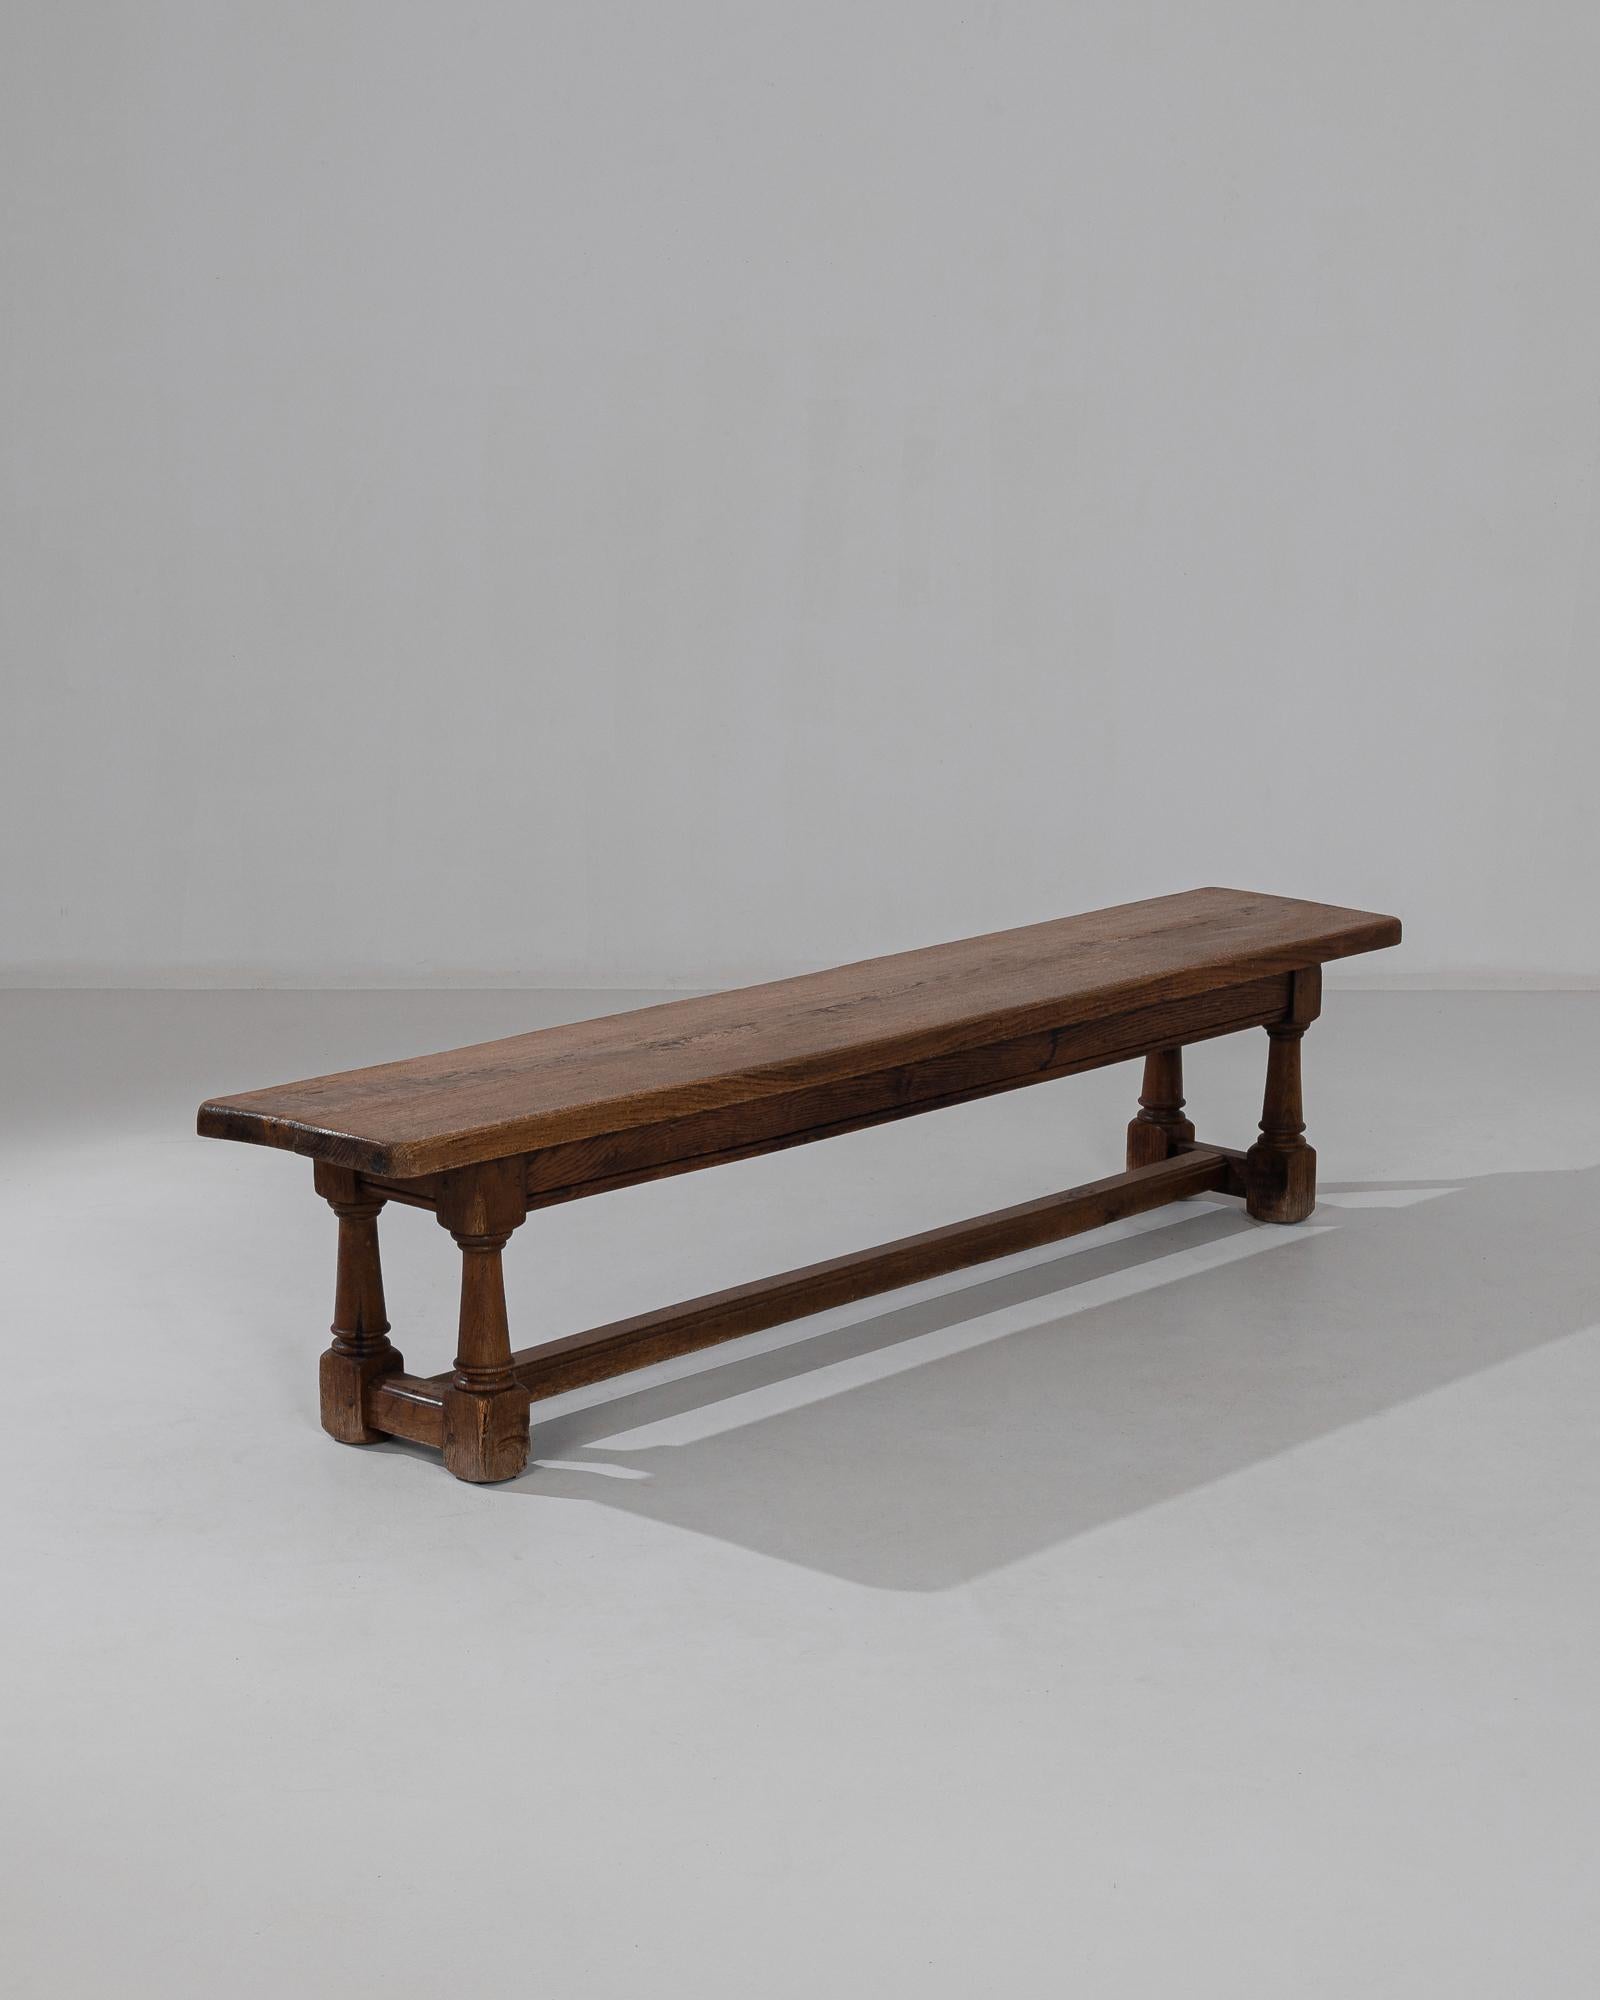 This wooden bench was made in Belgium, circa 1960. A robust construction paired with restrained decoration to bring a quiet dignity, enhanced by the rich tone of the polished oak. A ridge runs along the stretch of the apron, while rings adorn the